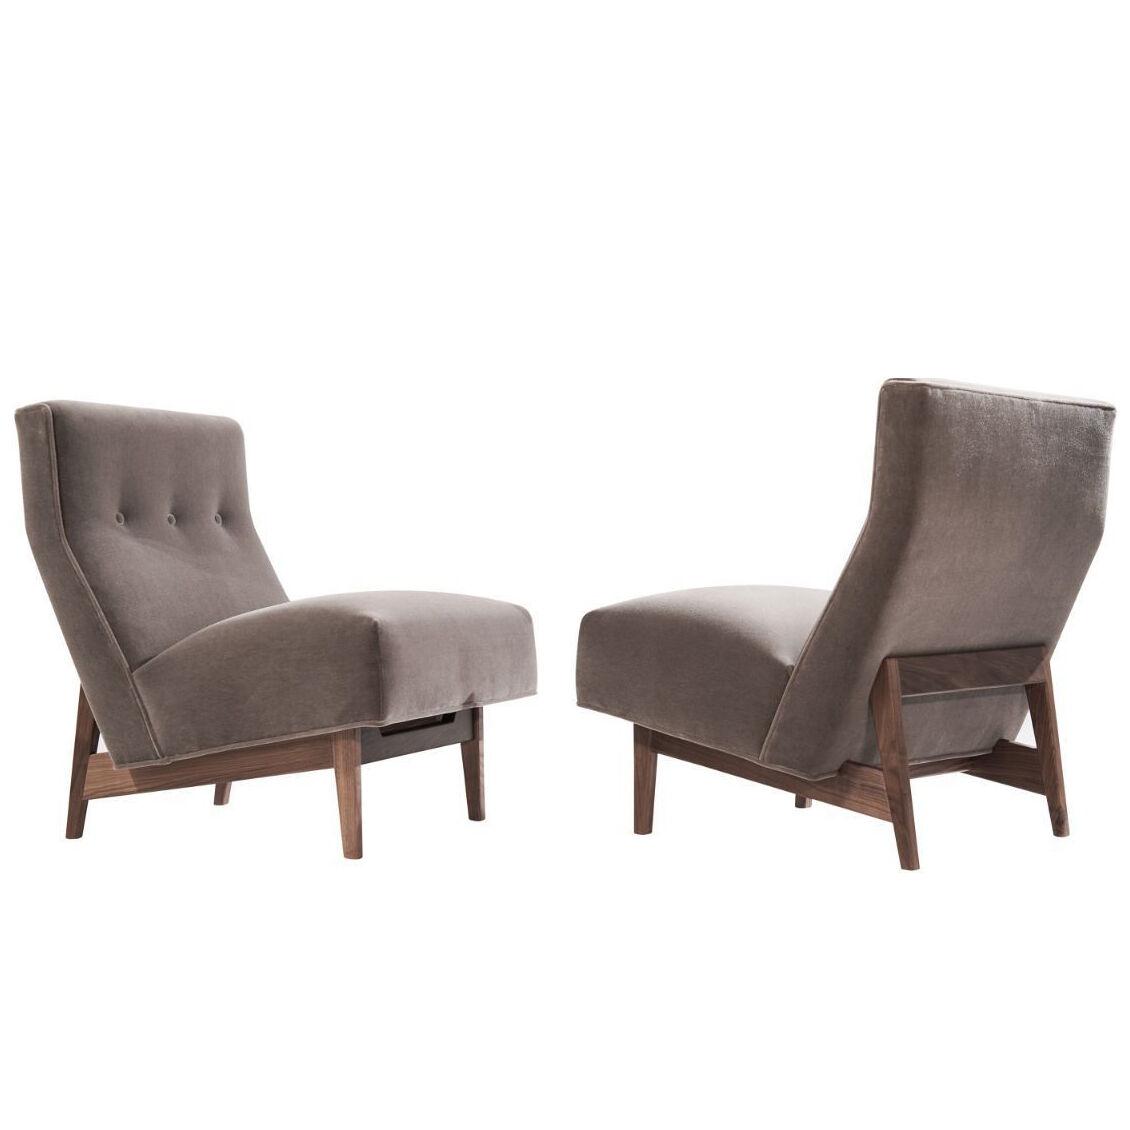 Classic Slipper Chairs by Jens Risom in Mohair, circa 1950s